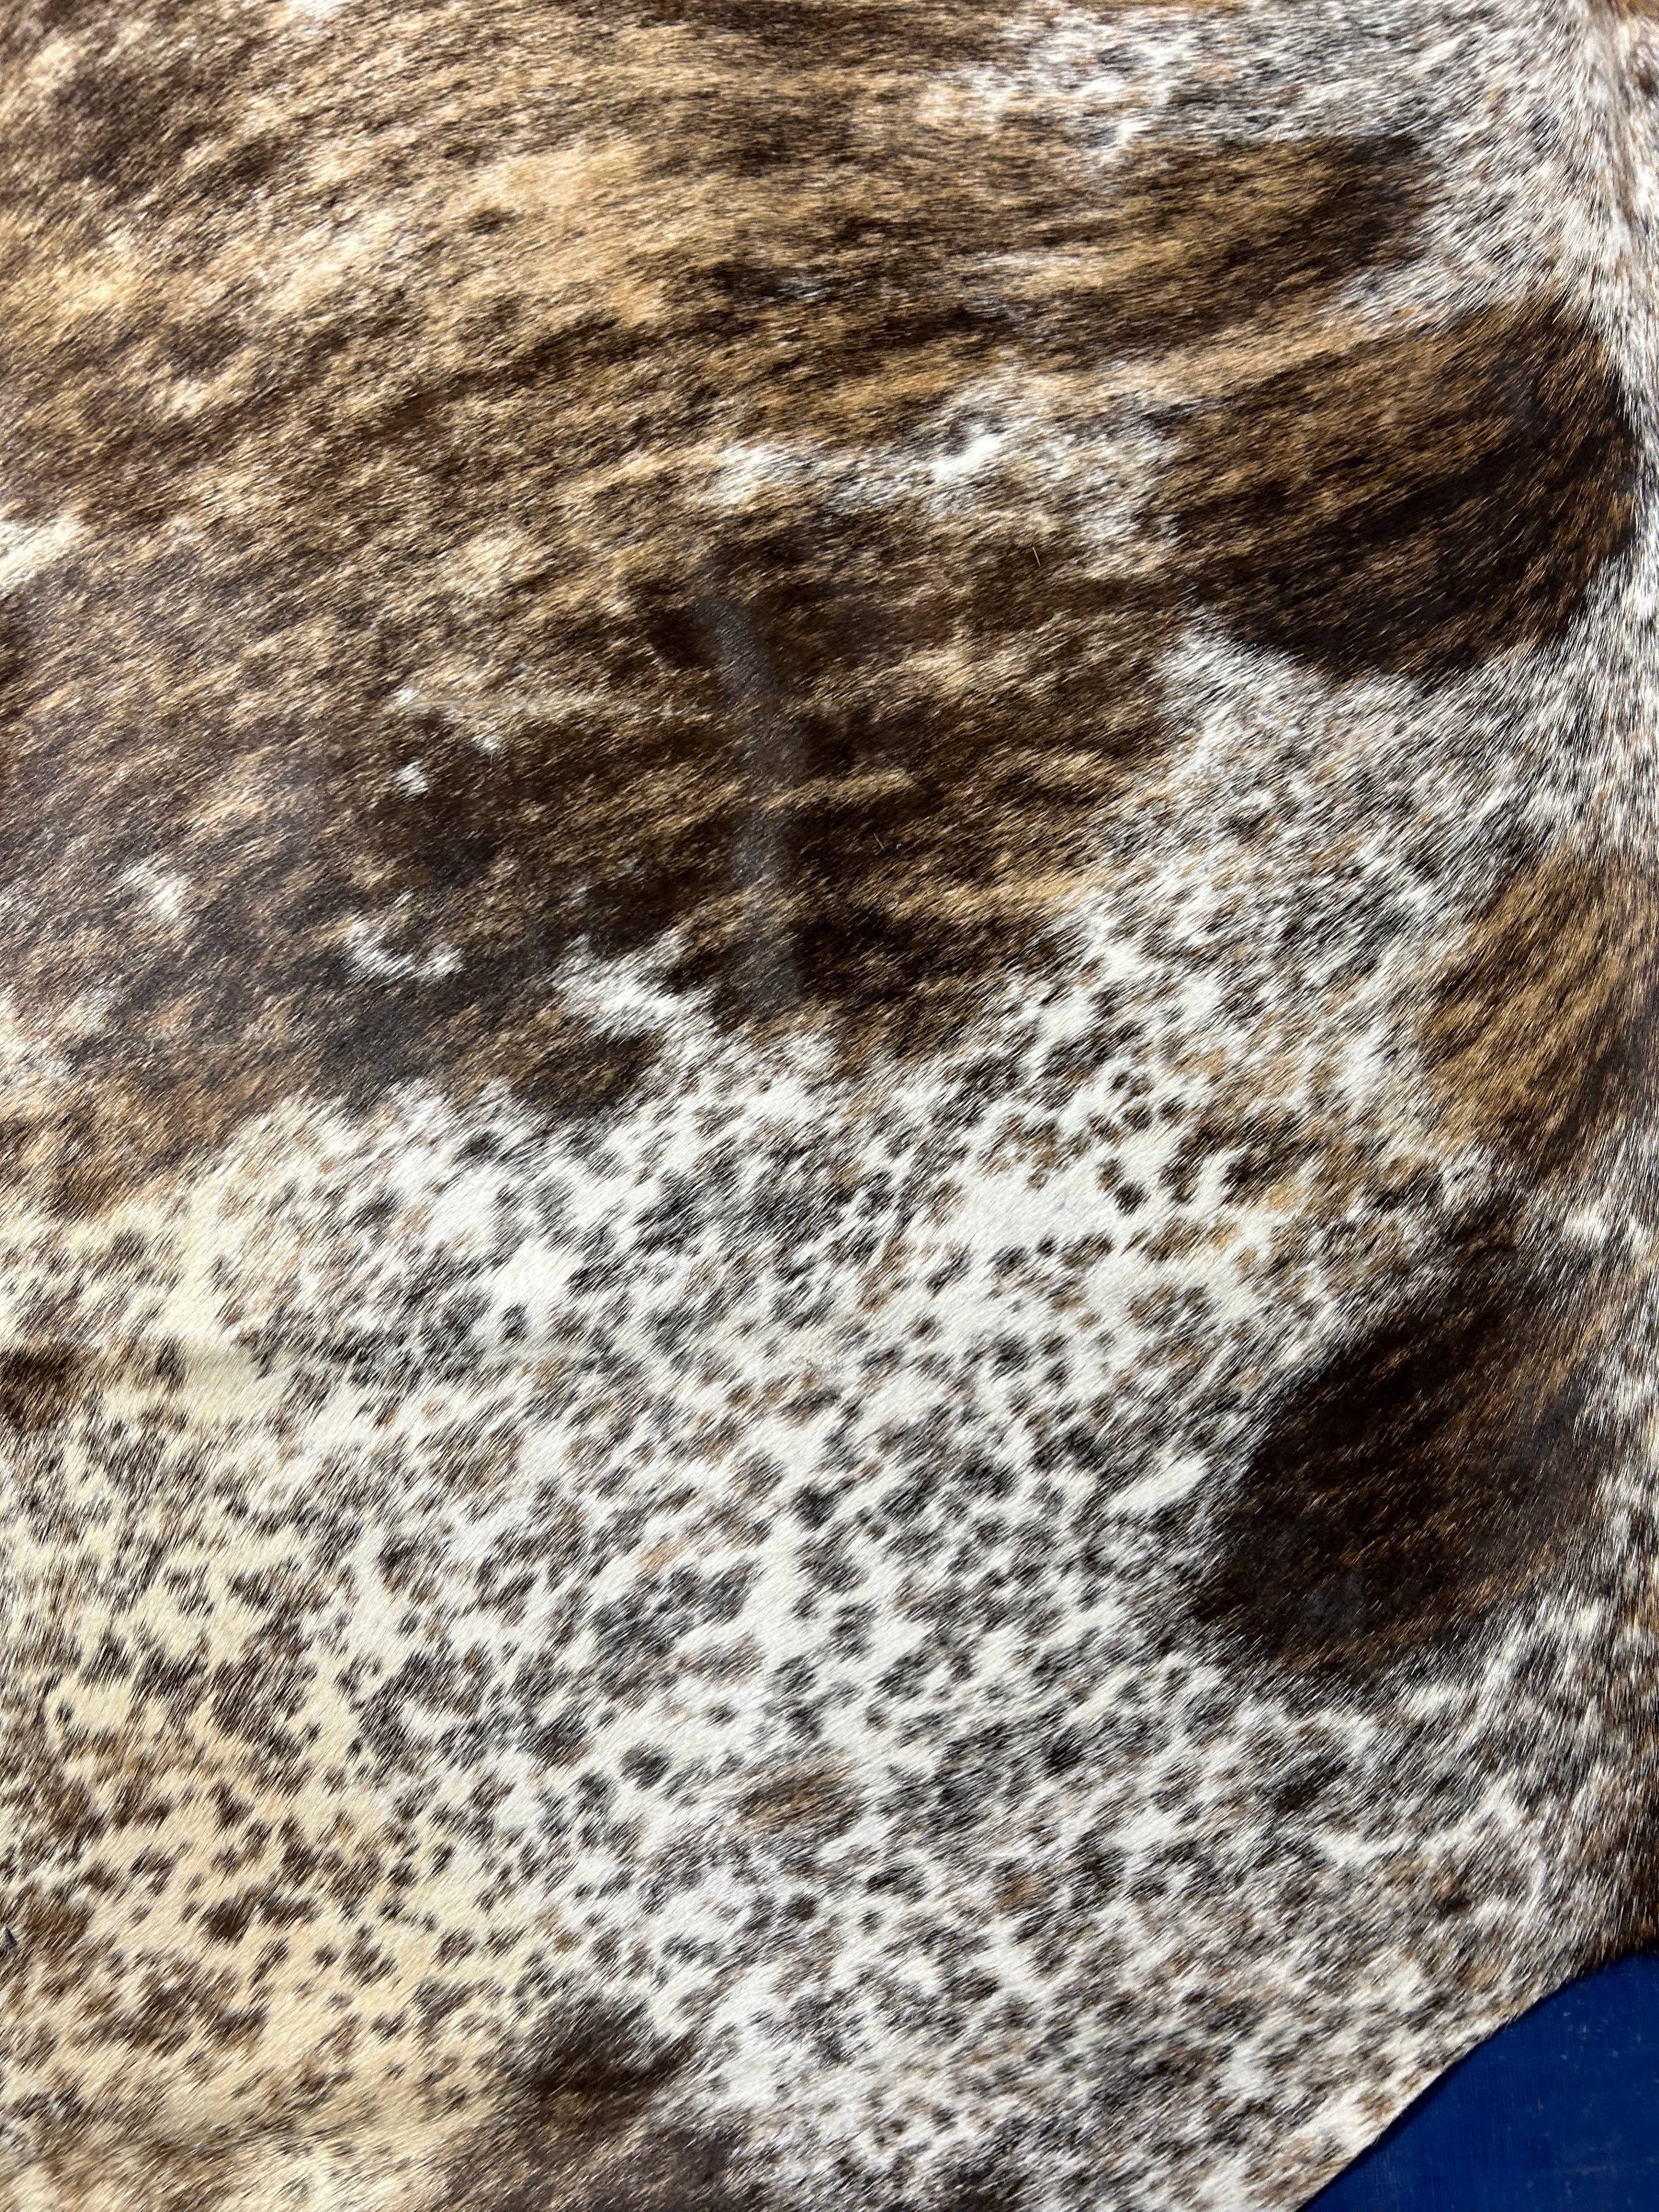 Gorgeous Brazilian Speckled Brindle Tricolor Cowhide Rug Size: 8x7 feet O-405